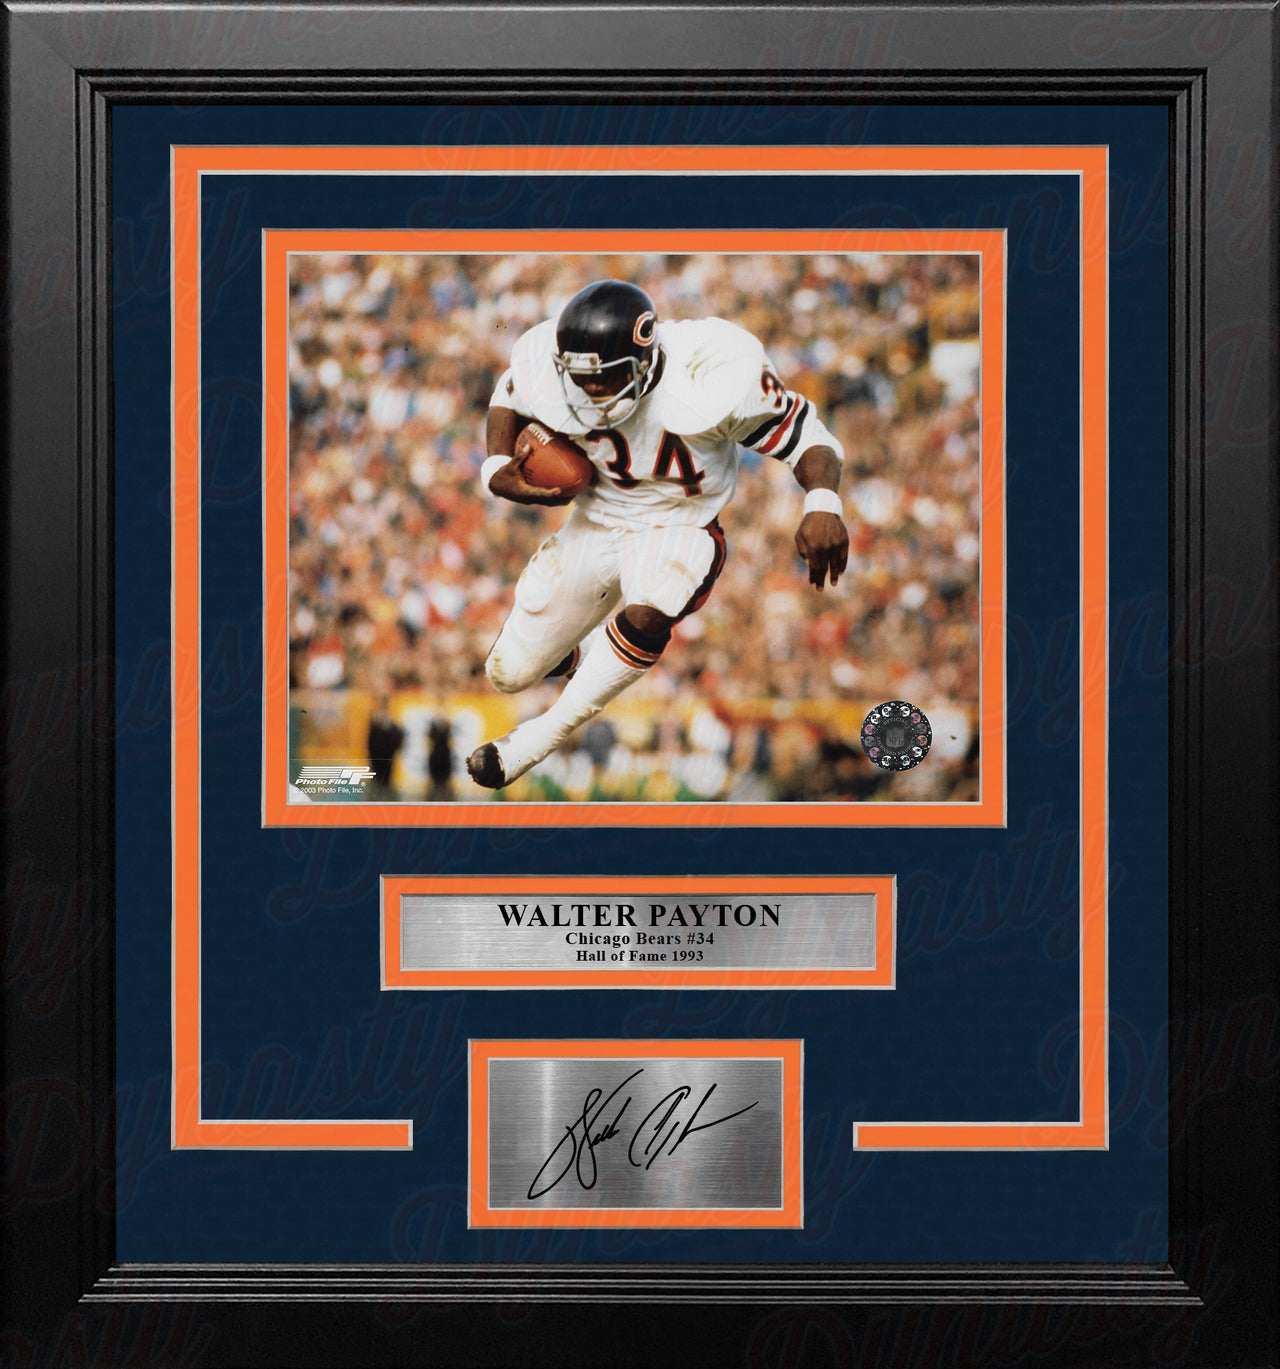 Walter Payton in Action Chicago Bears 8" x 10" Framed Football Photo with Engraved Autograph - Dynasty Sports & Framing 